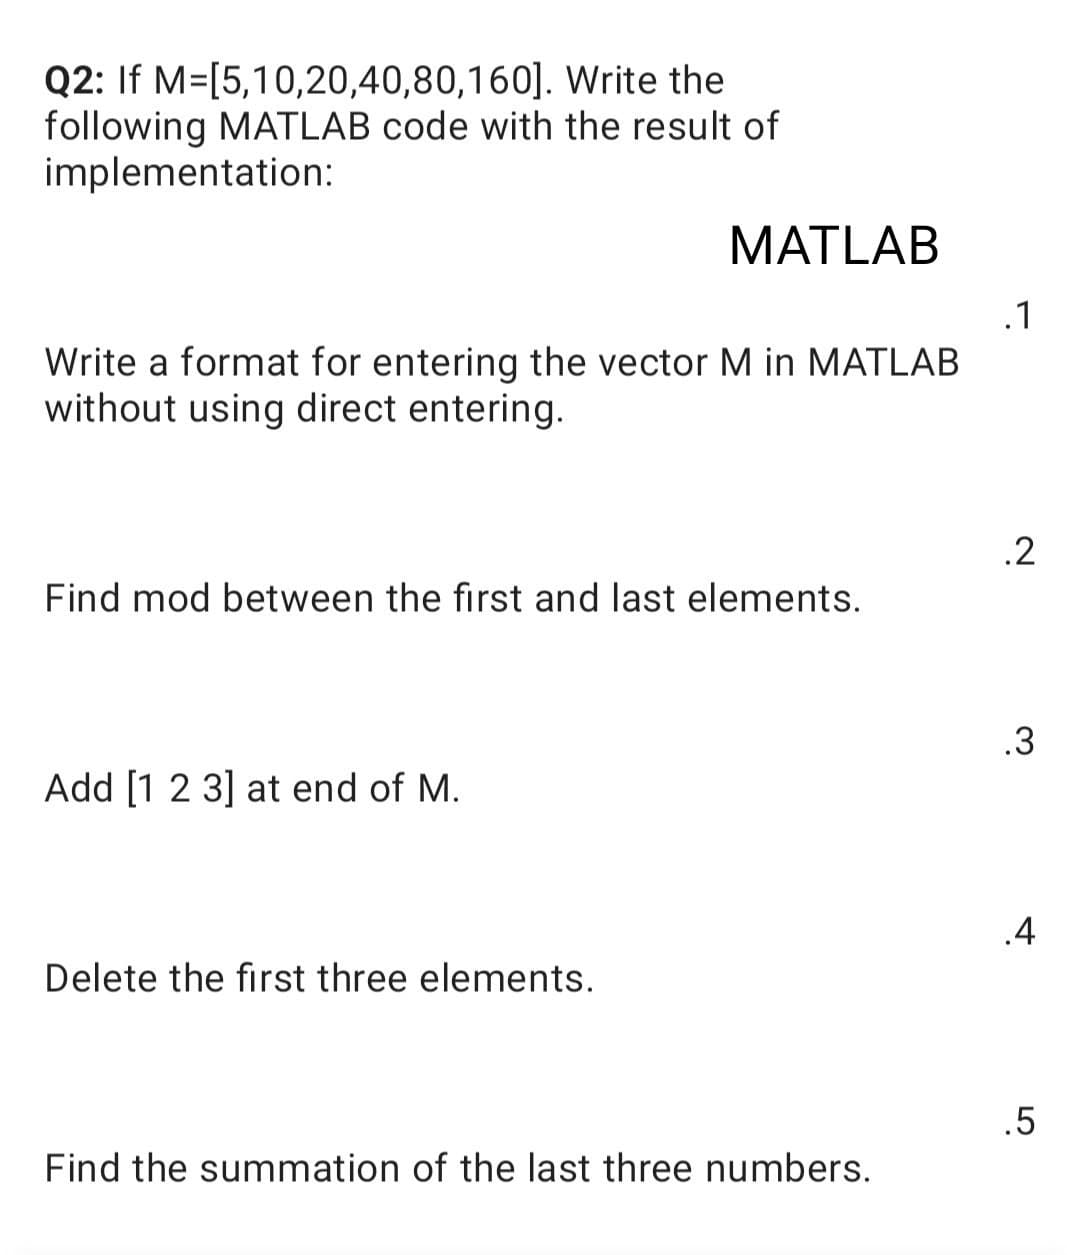 Write the
Q2: If M=[5,10,20,40,80,160].
following MATLAB code with the result of
implementation:
MATLAB
.1
Write a format for entering the vector M in MATLAB
without using direct entering.
.2
Find mod between the first and last elements.
.3
Add [1 2 3] at end of M.
.4
Delete the first three elements.
.5
Find the summation of the last three numbers.